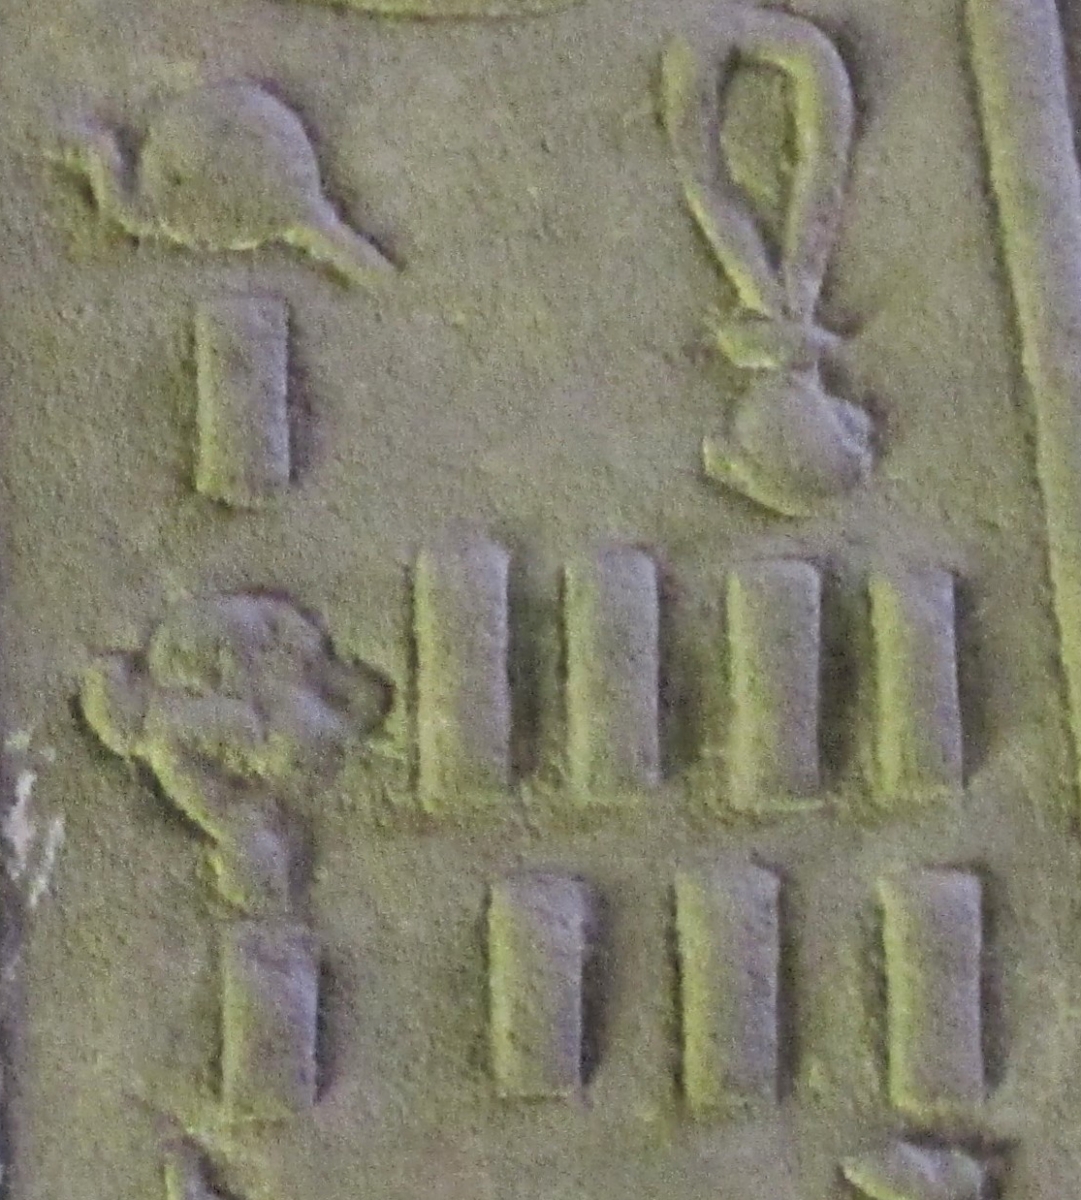 Hieroglyphs showing a stroke used in two different ways.